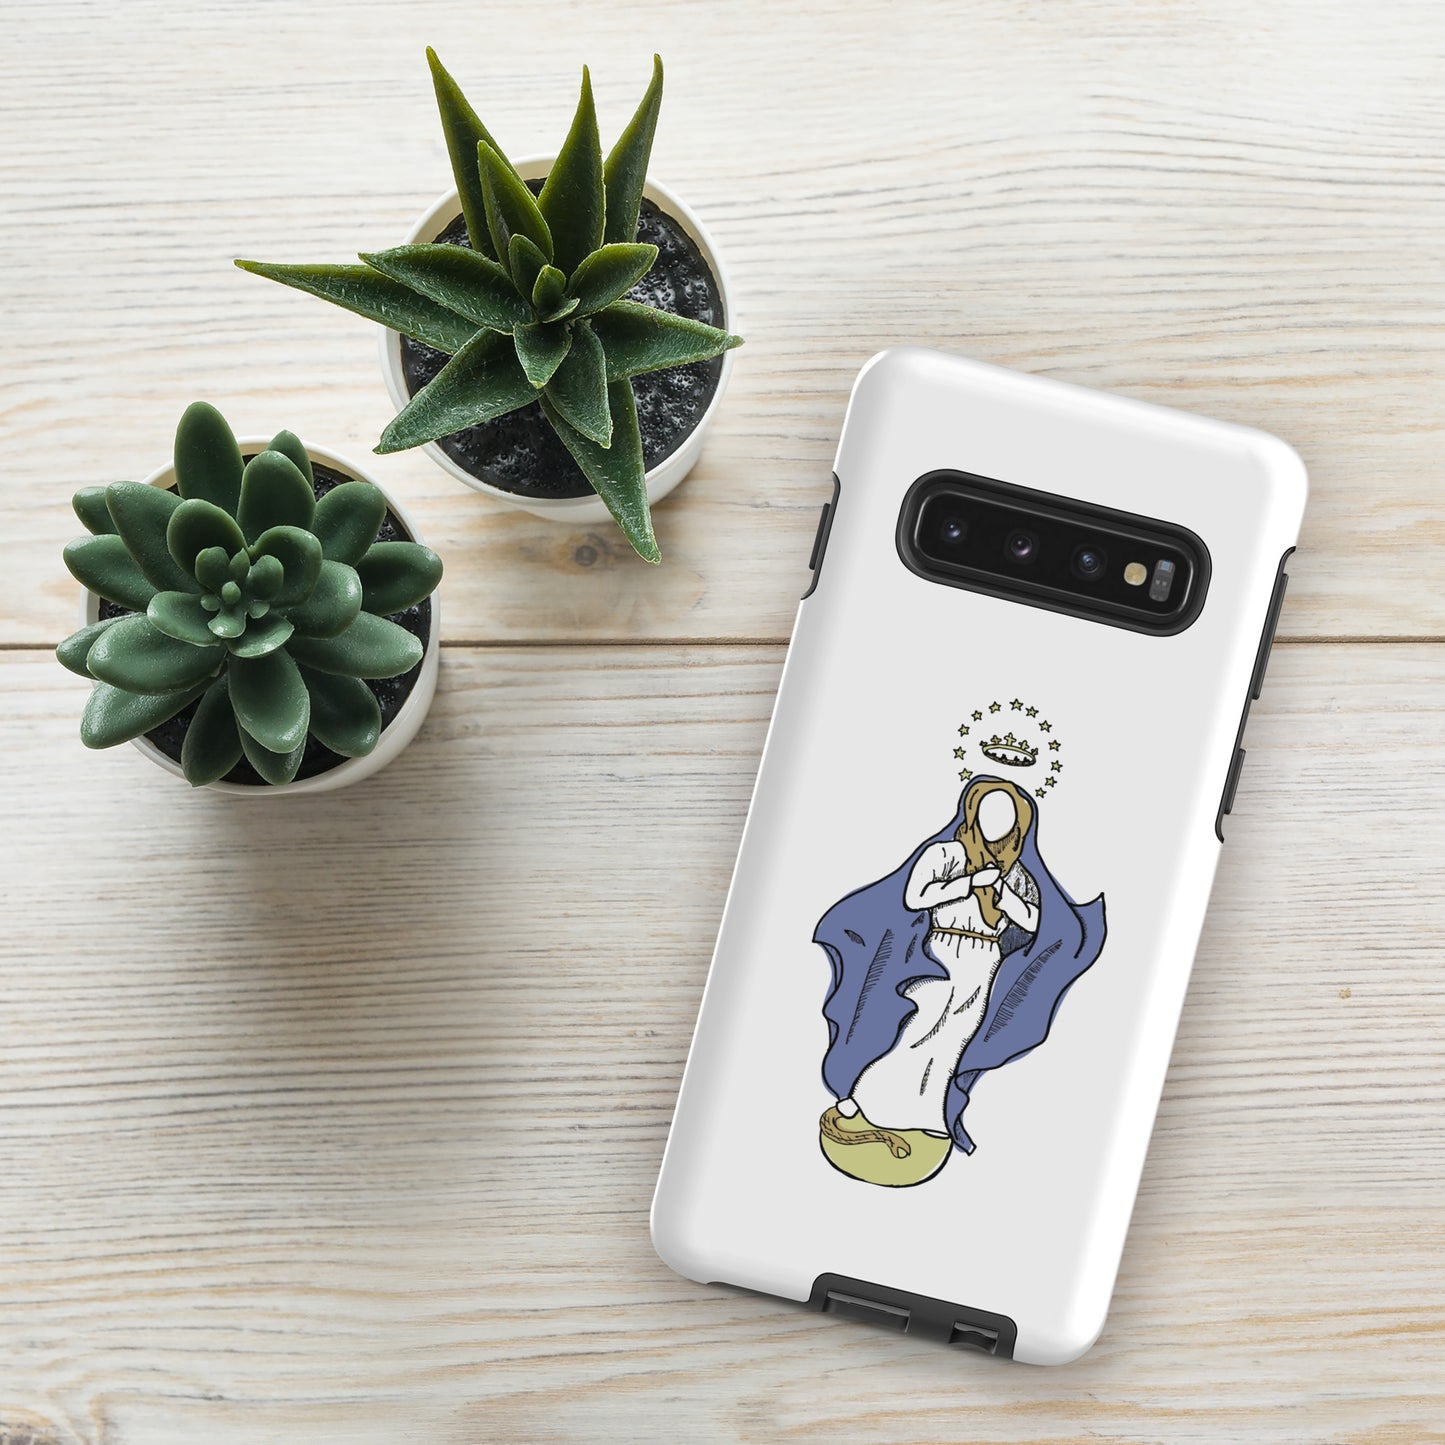 "Our Lady, Queen of Heaven" - Samsung Case